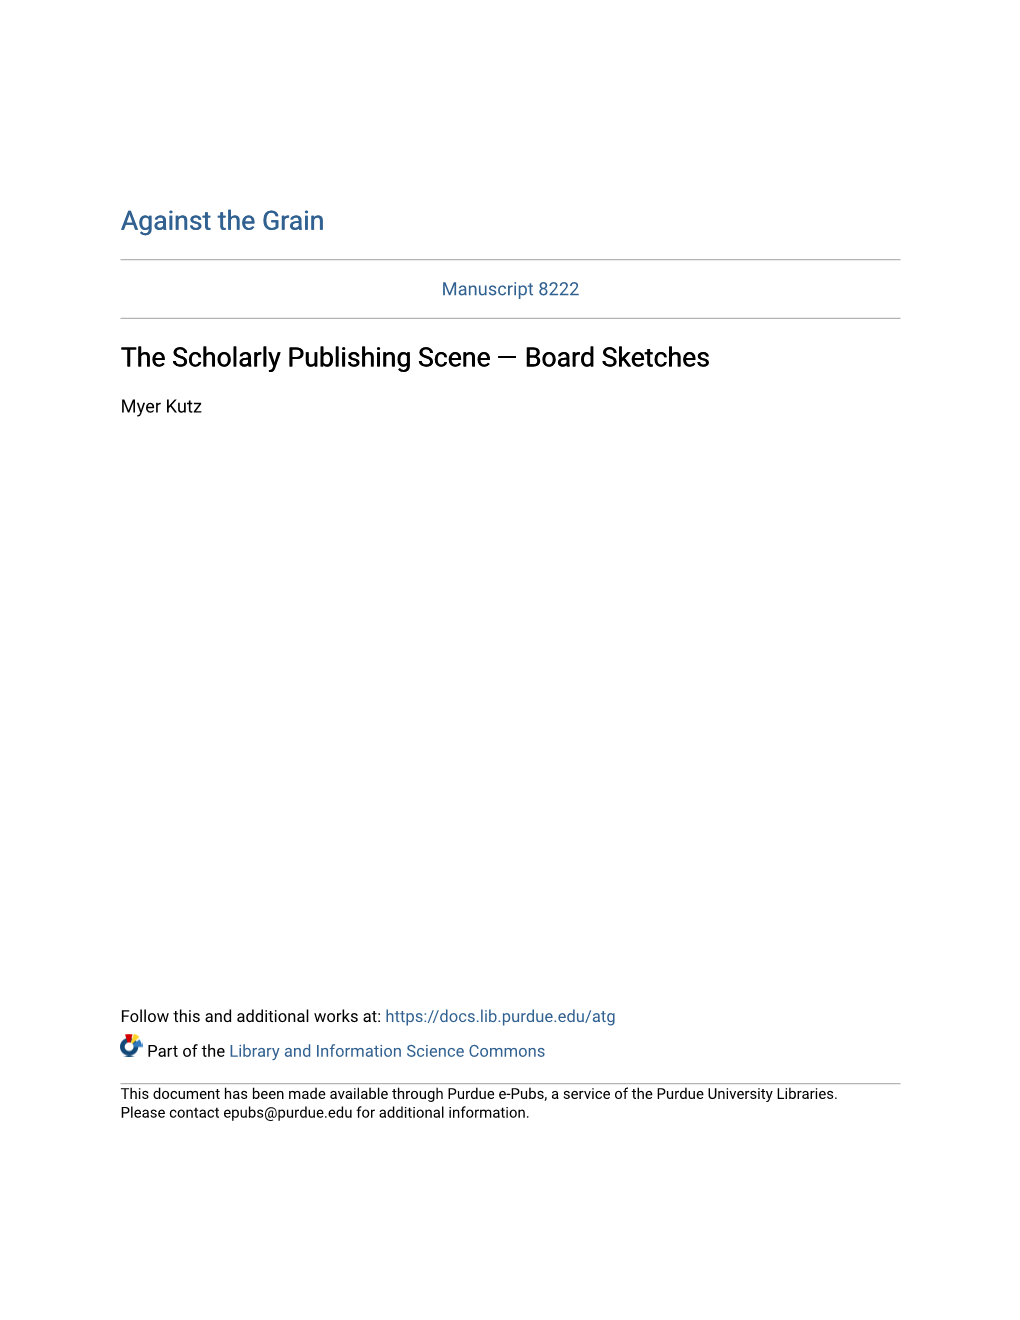 The Scholarly Publishing Scene — Board Sketches